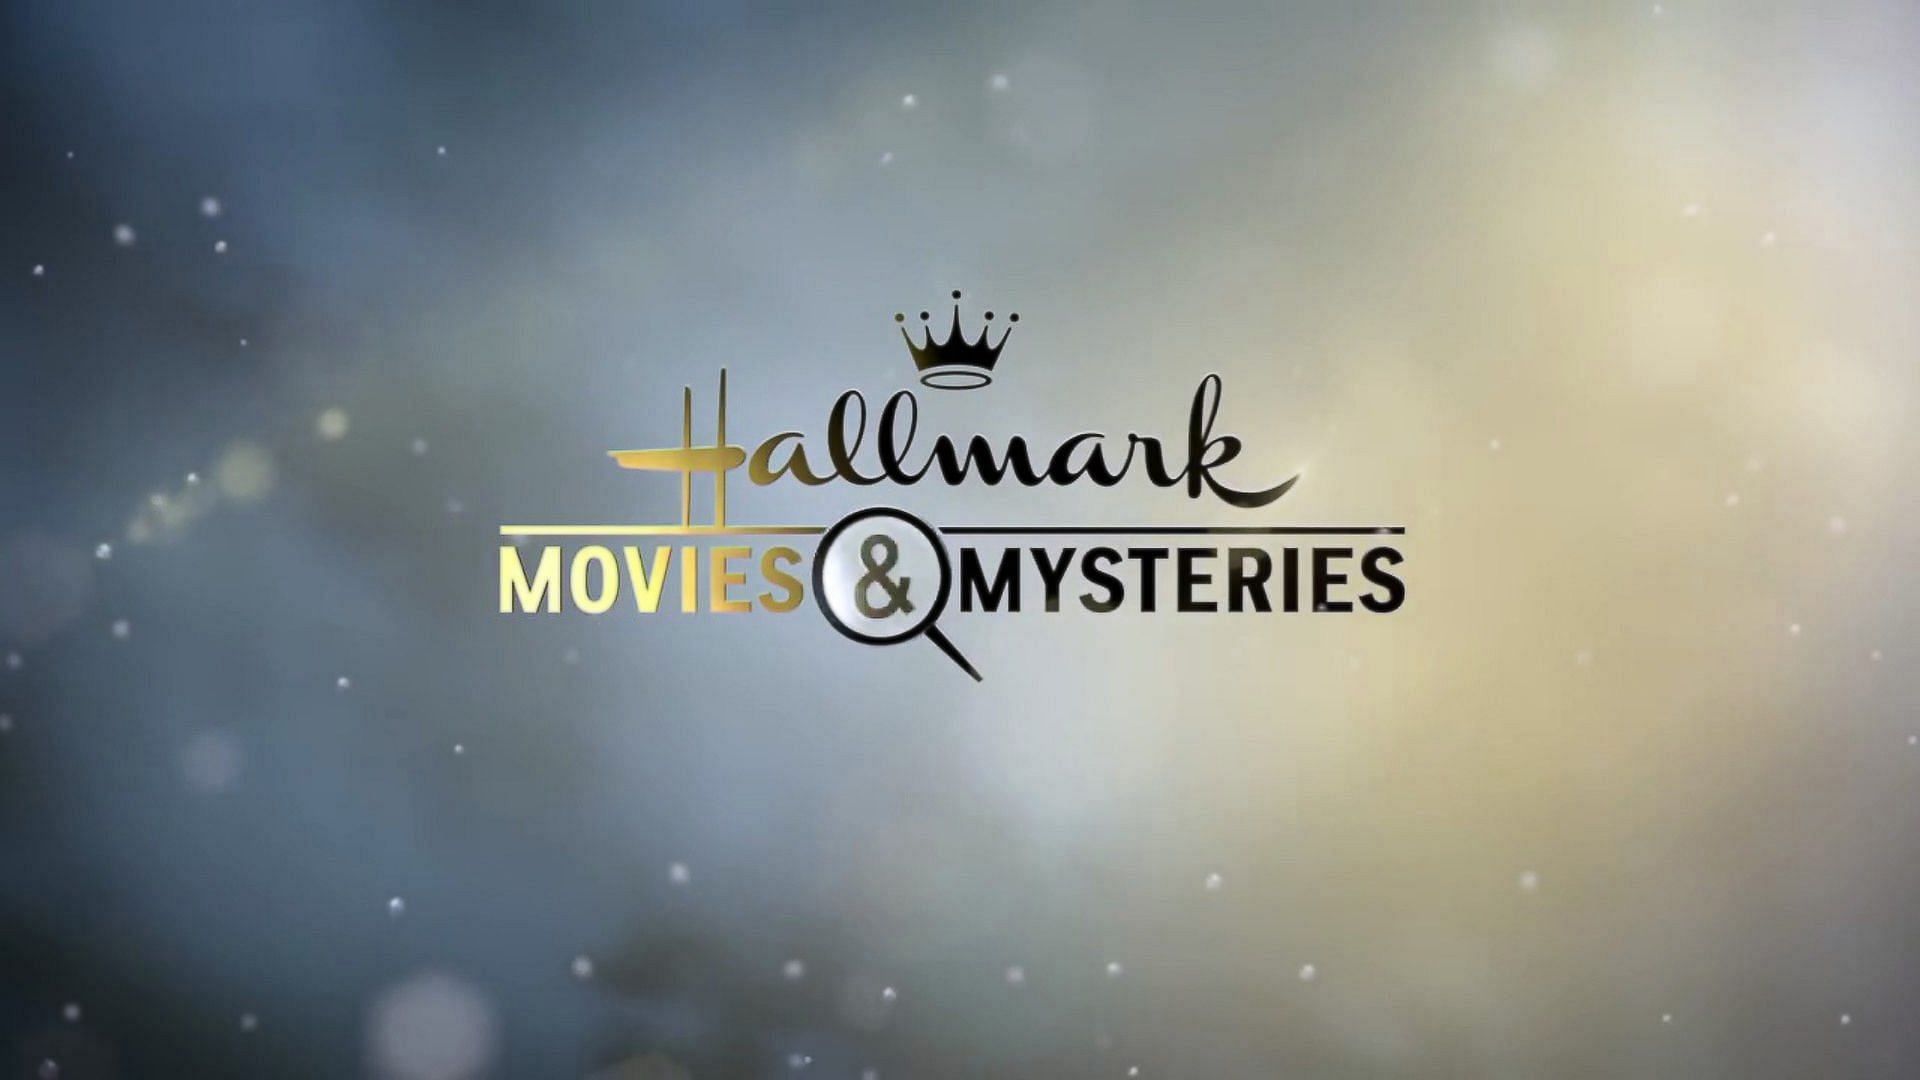 4 Hallmark Movies & Mysteries (HMM) releases of May and June 2023